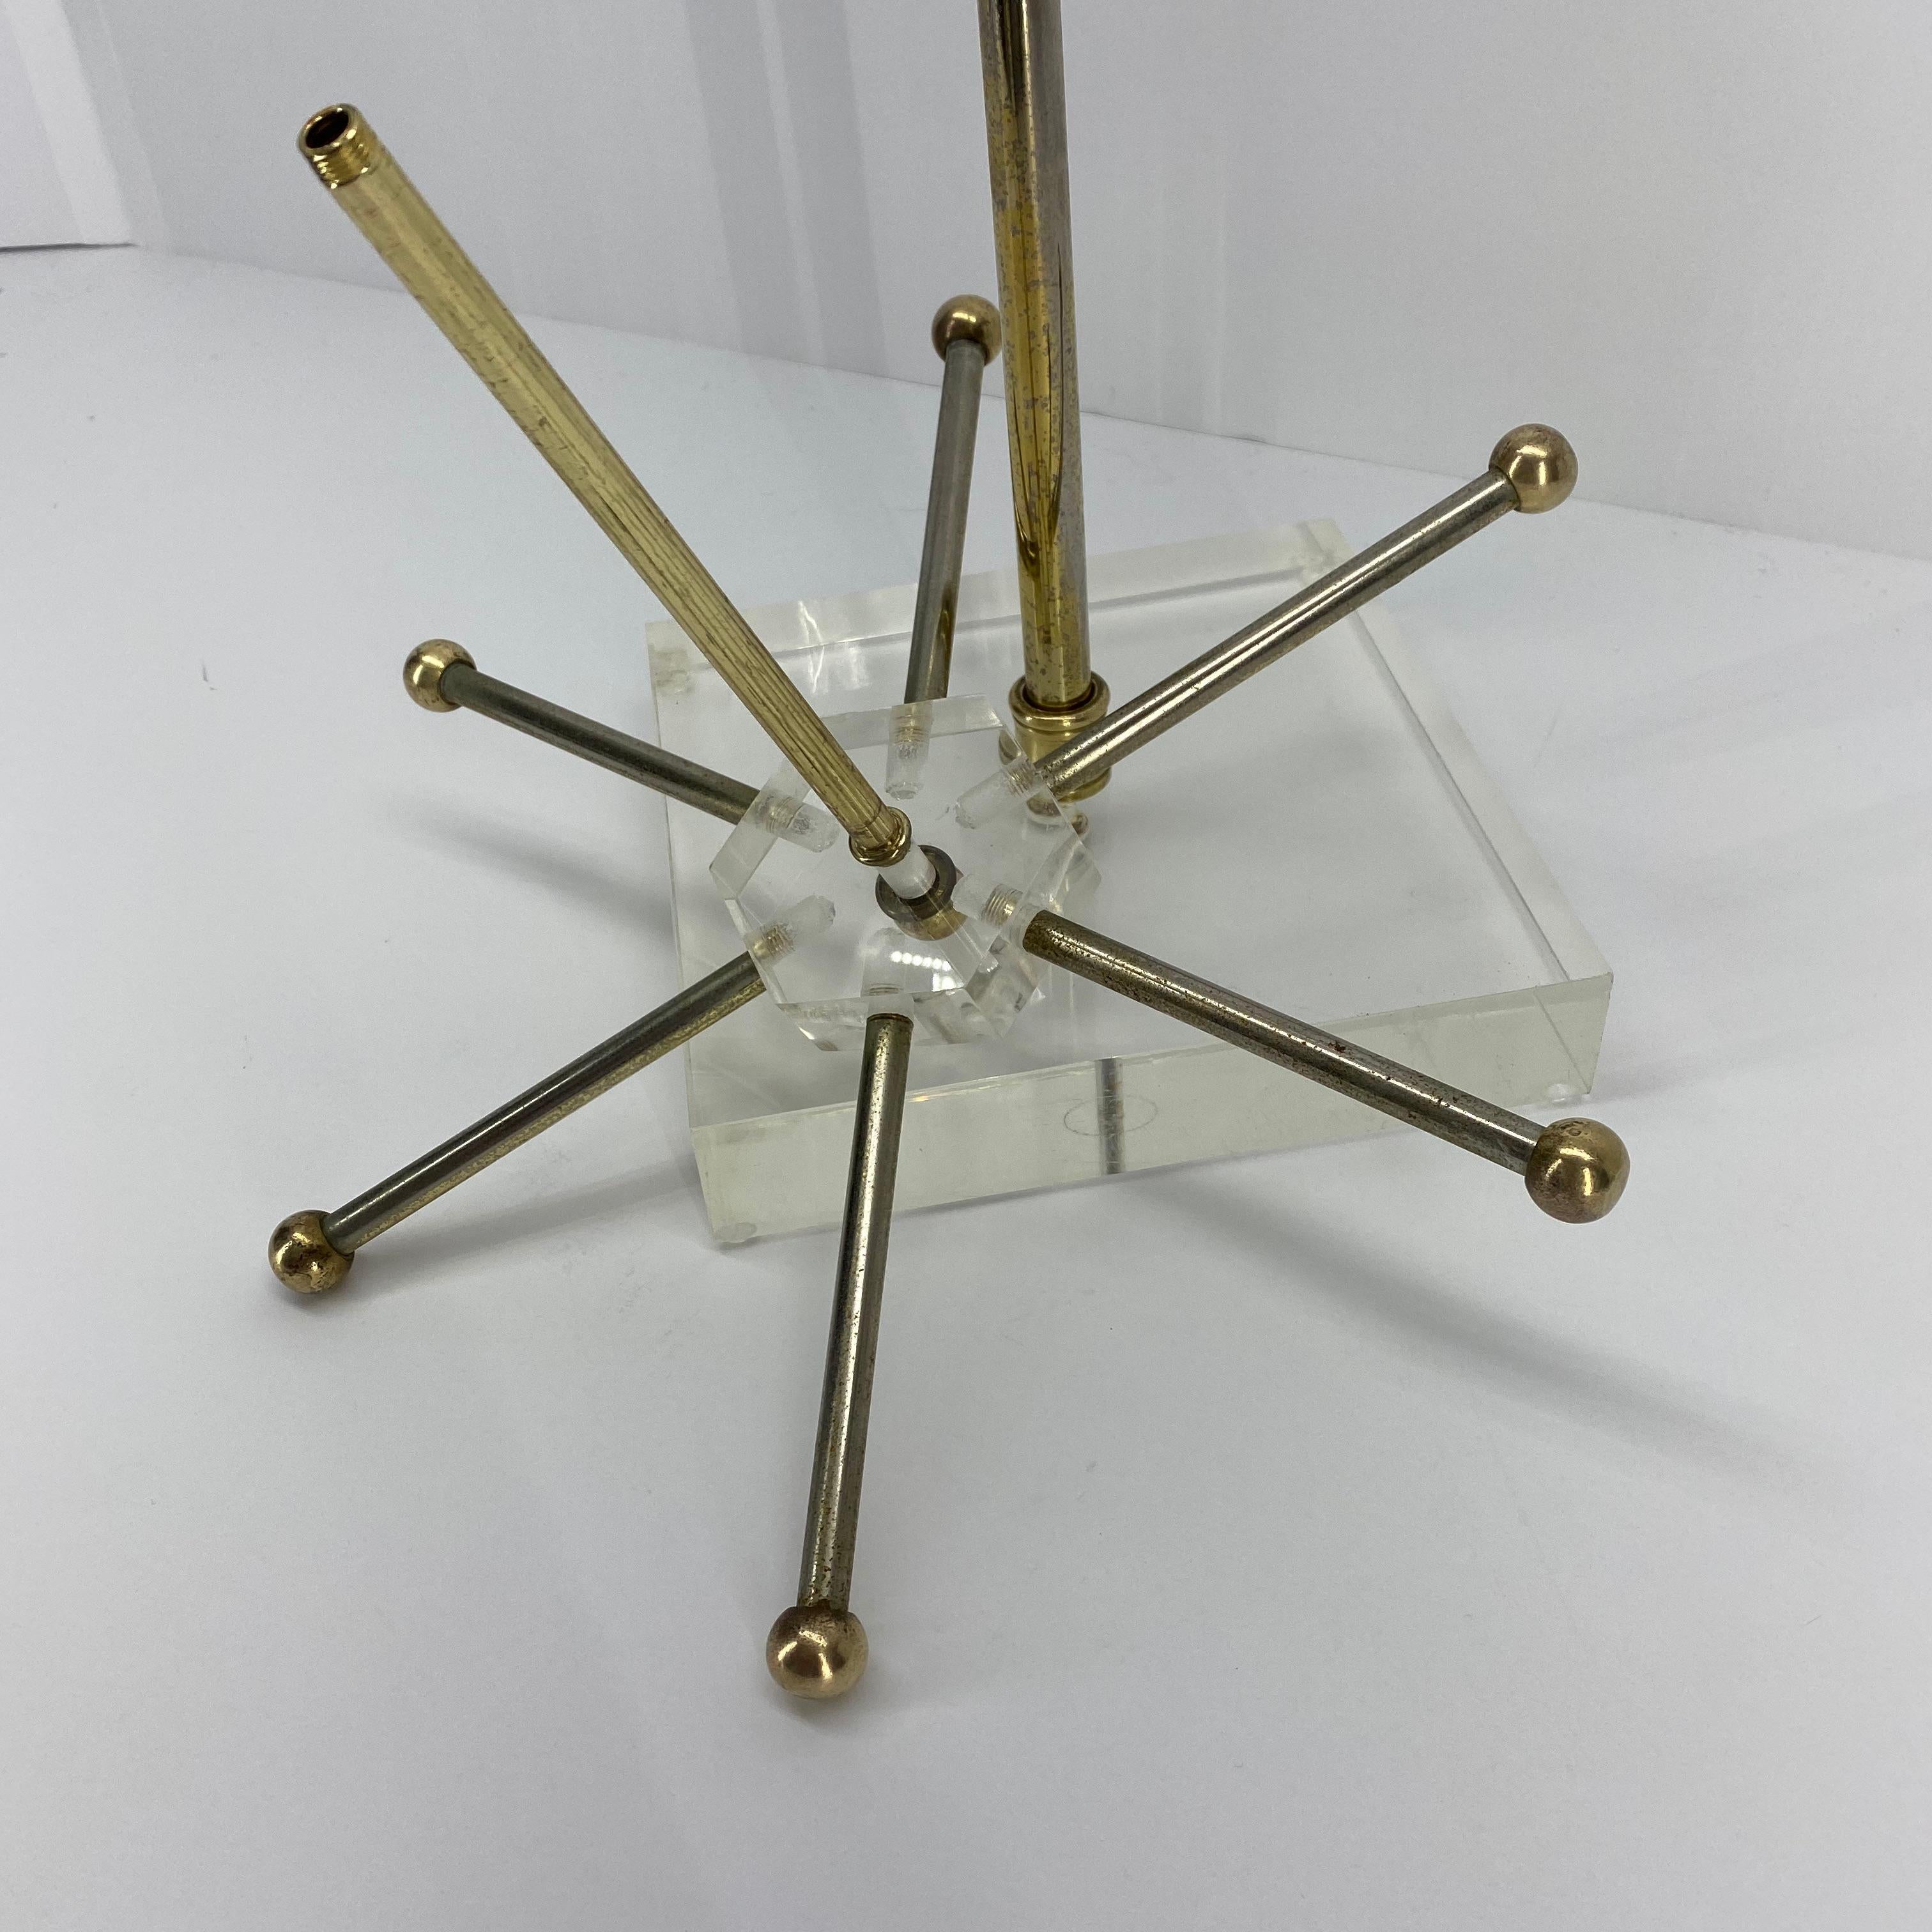 Mid-Century Modern Lucite and Brass Tie And Jewelry Stand For Sale 6